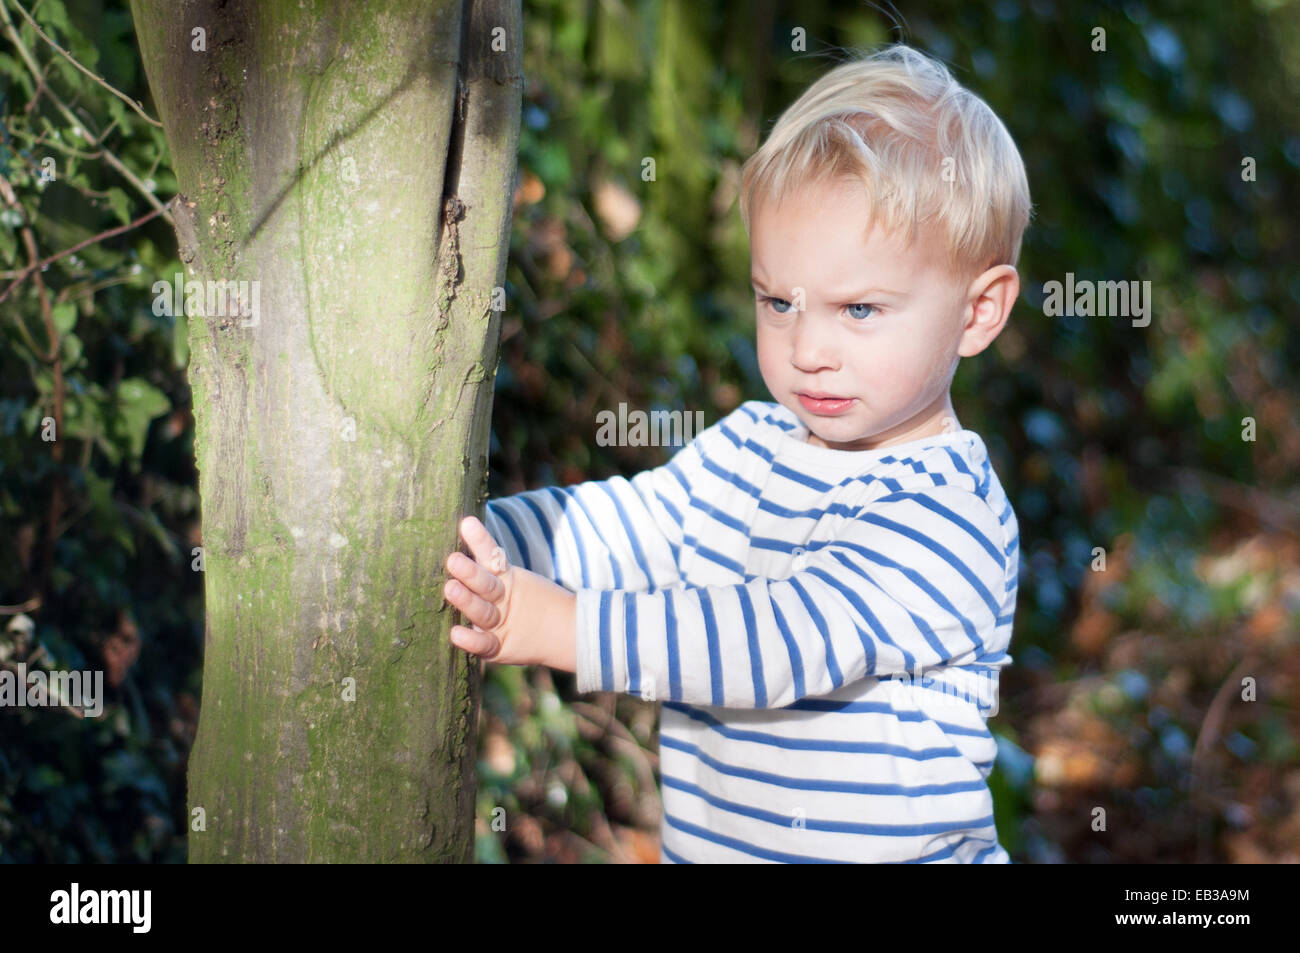 Portrait of boy standing by tree Banque D'Images